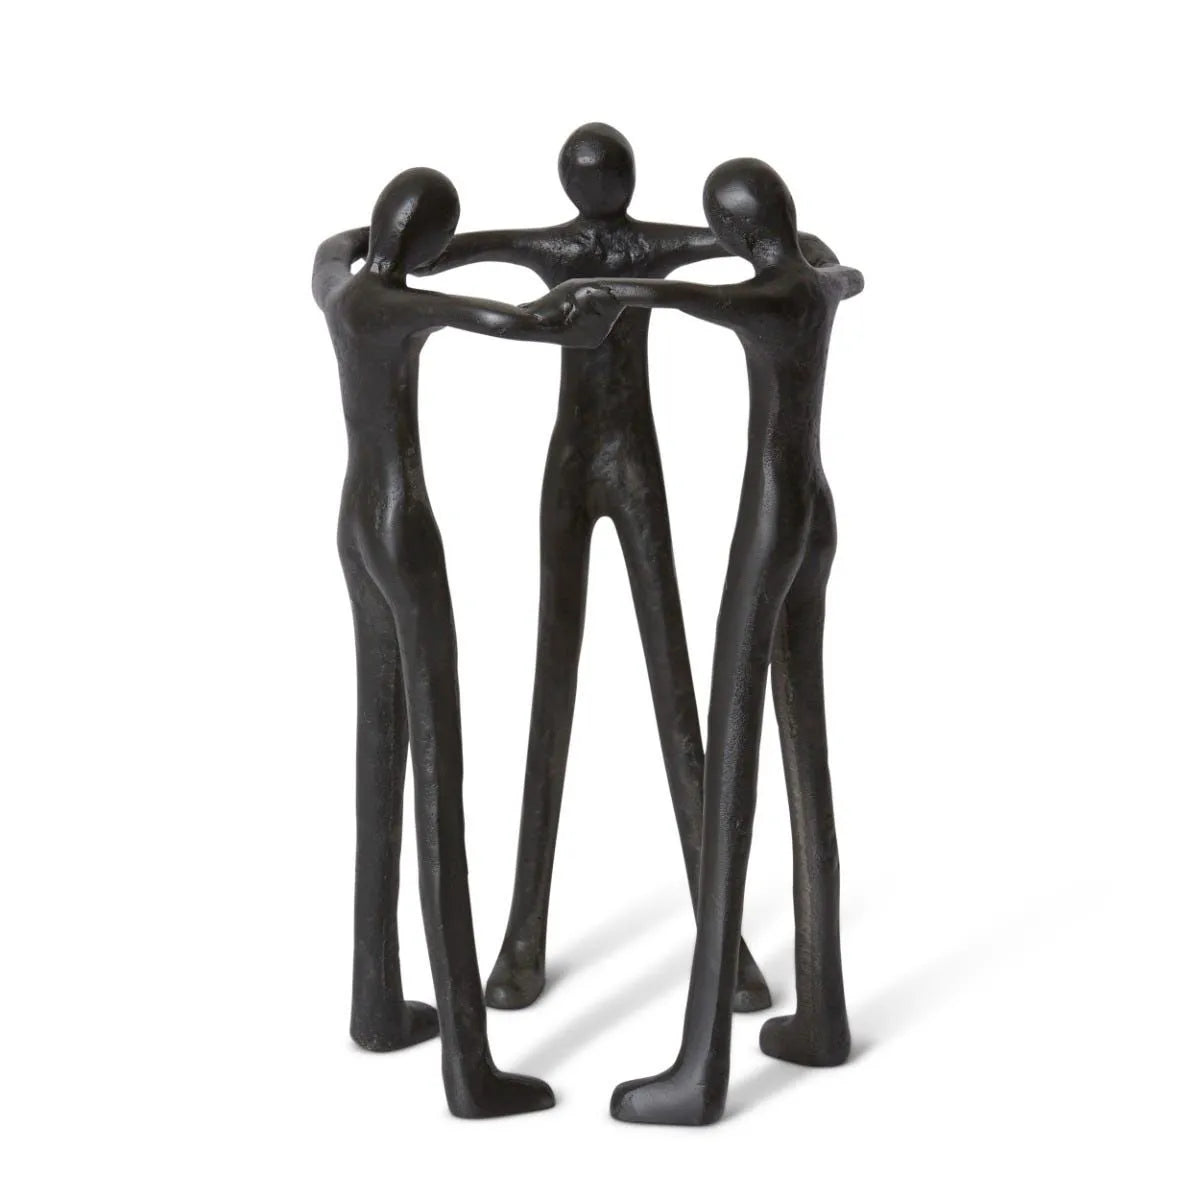 Our Friendship Sculpture adds the perfect touch to any room! Its 23cm x 22cm black design enhances interiors with its beautiful décor accents, creating an inviting atmosphere in your home.